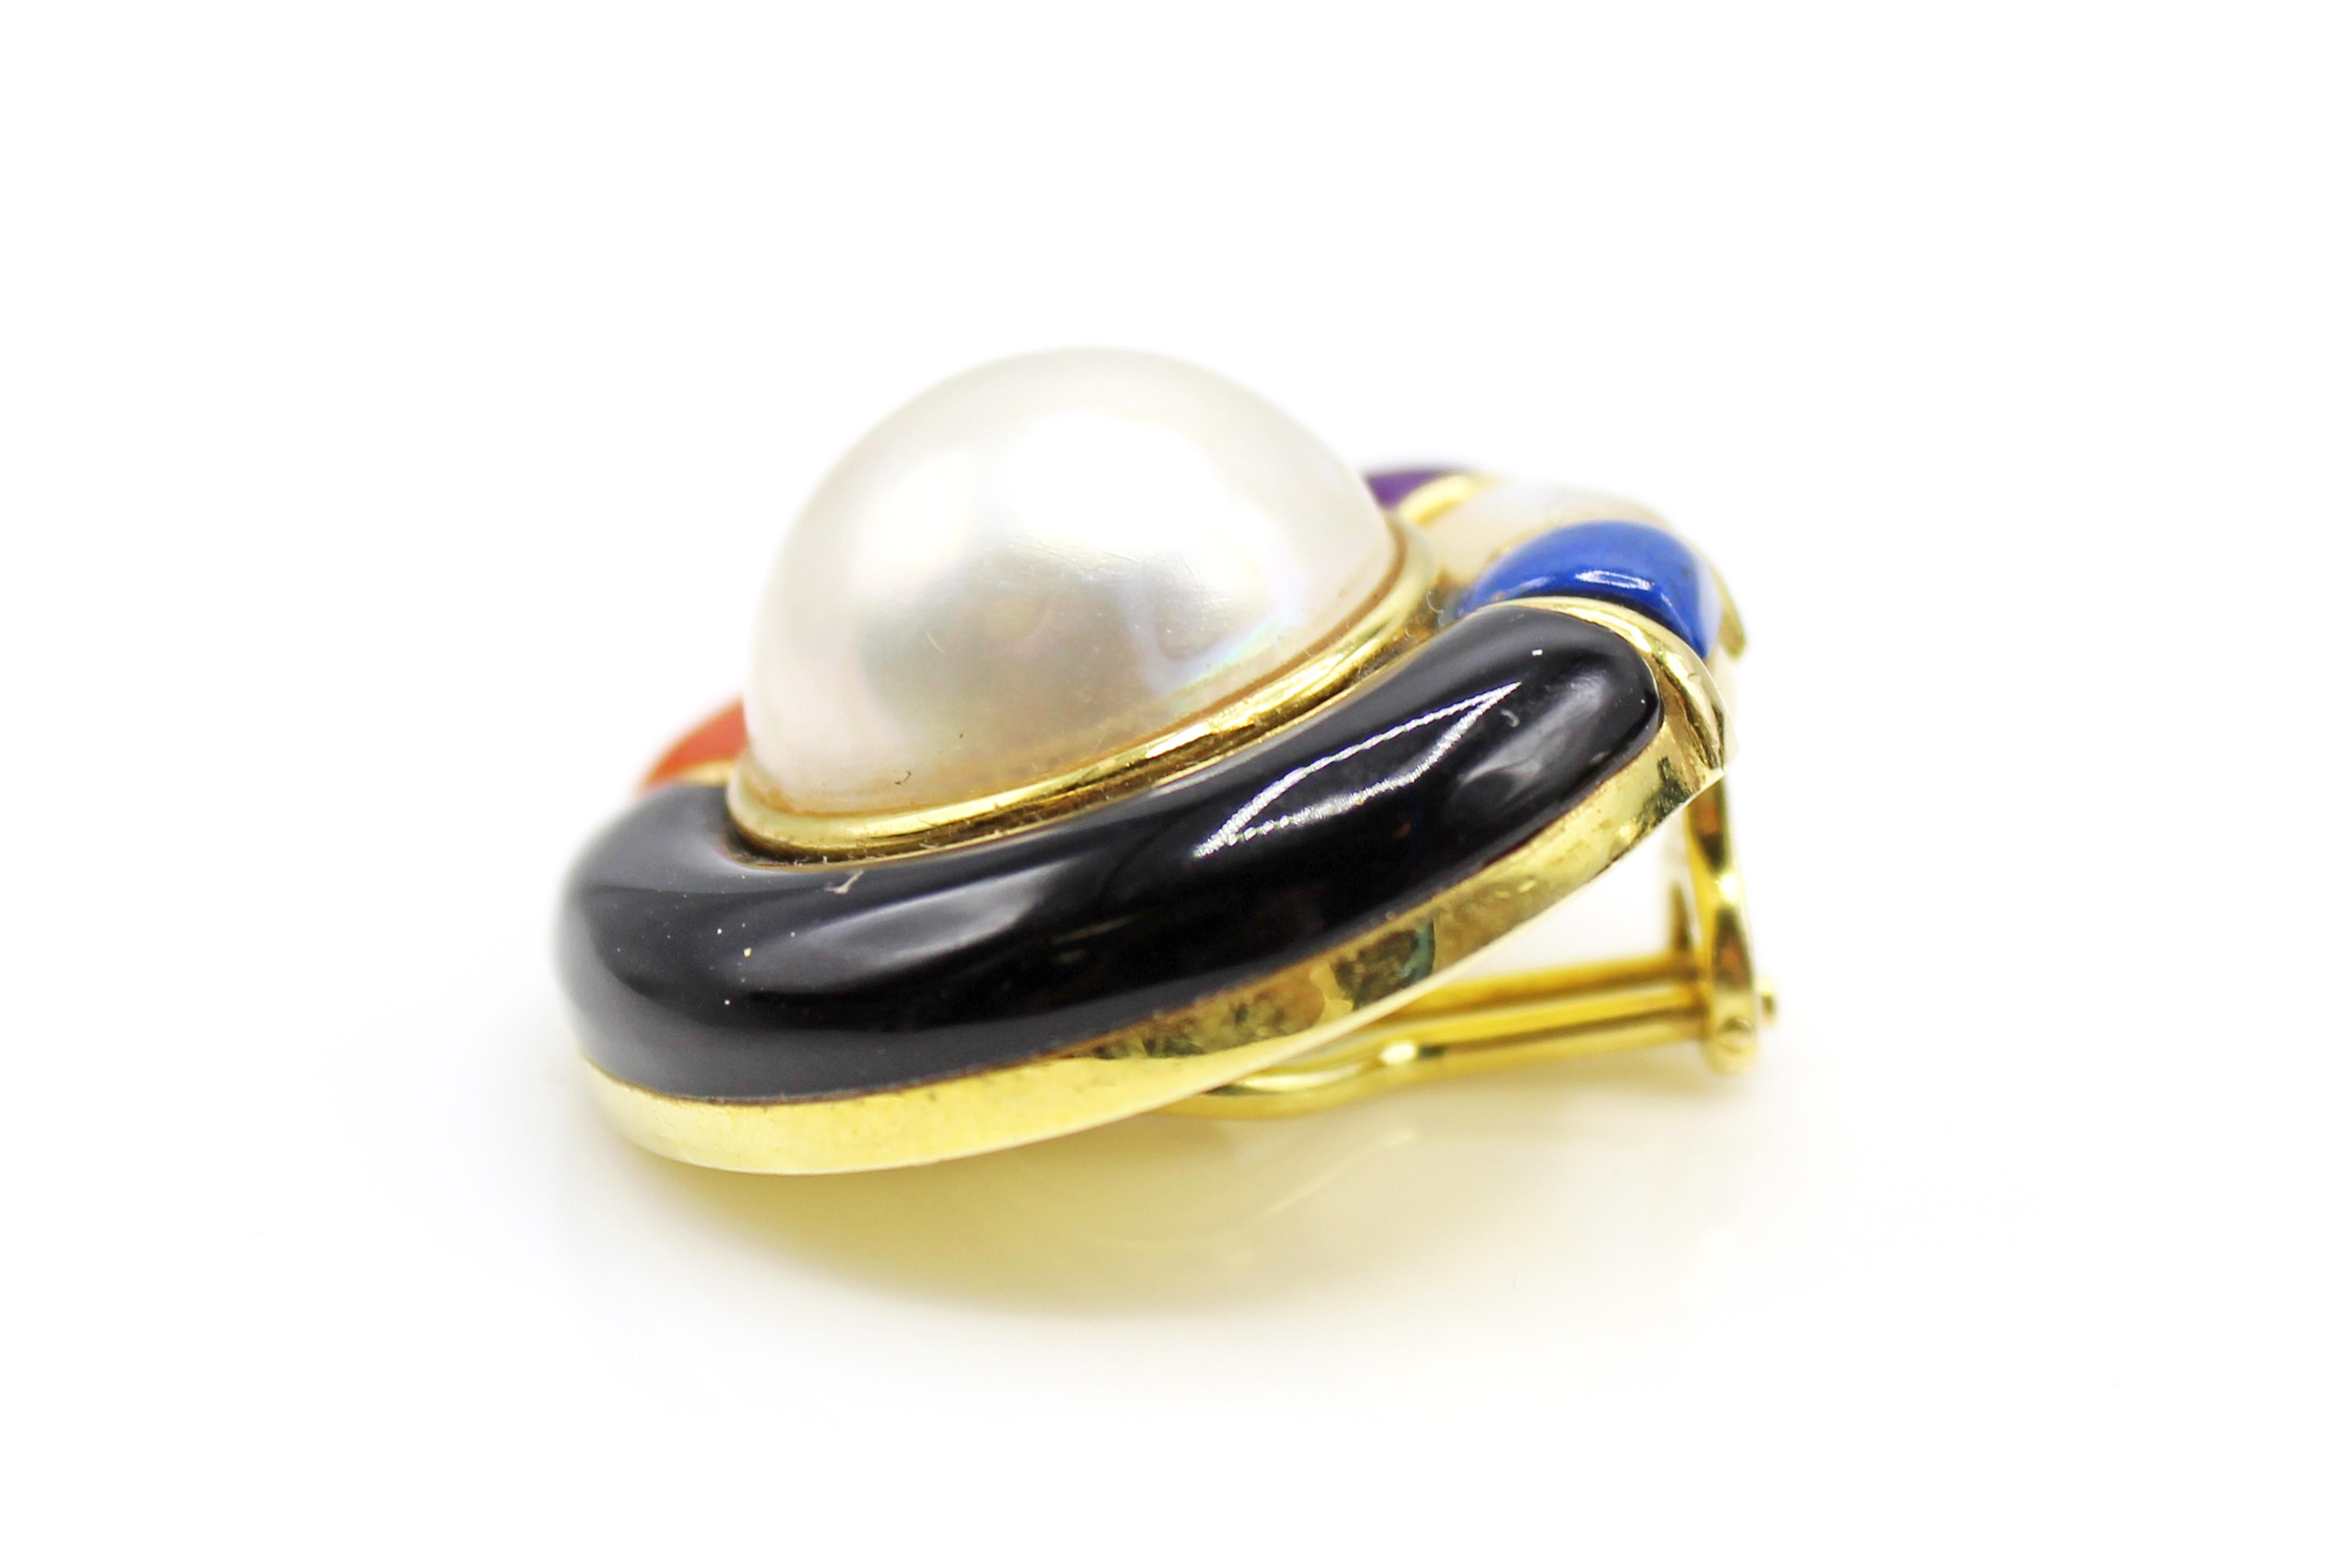 These amazingly well hand-crafted 1960s ear clips were designed in a round form with a thin border of high polished gold. The center piece features a wonderful white lustrous mabe pearl, bezel set and further surrounded by onyx, lapis lazuli,